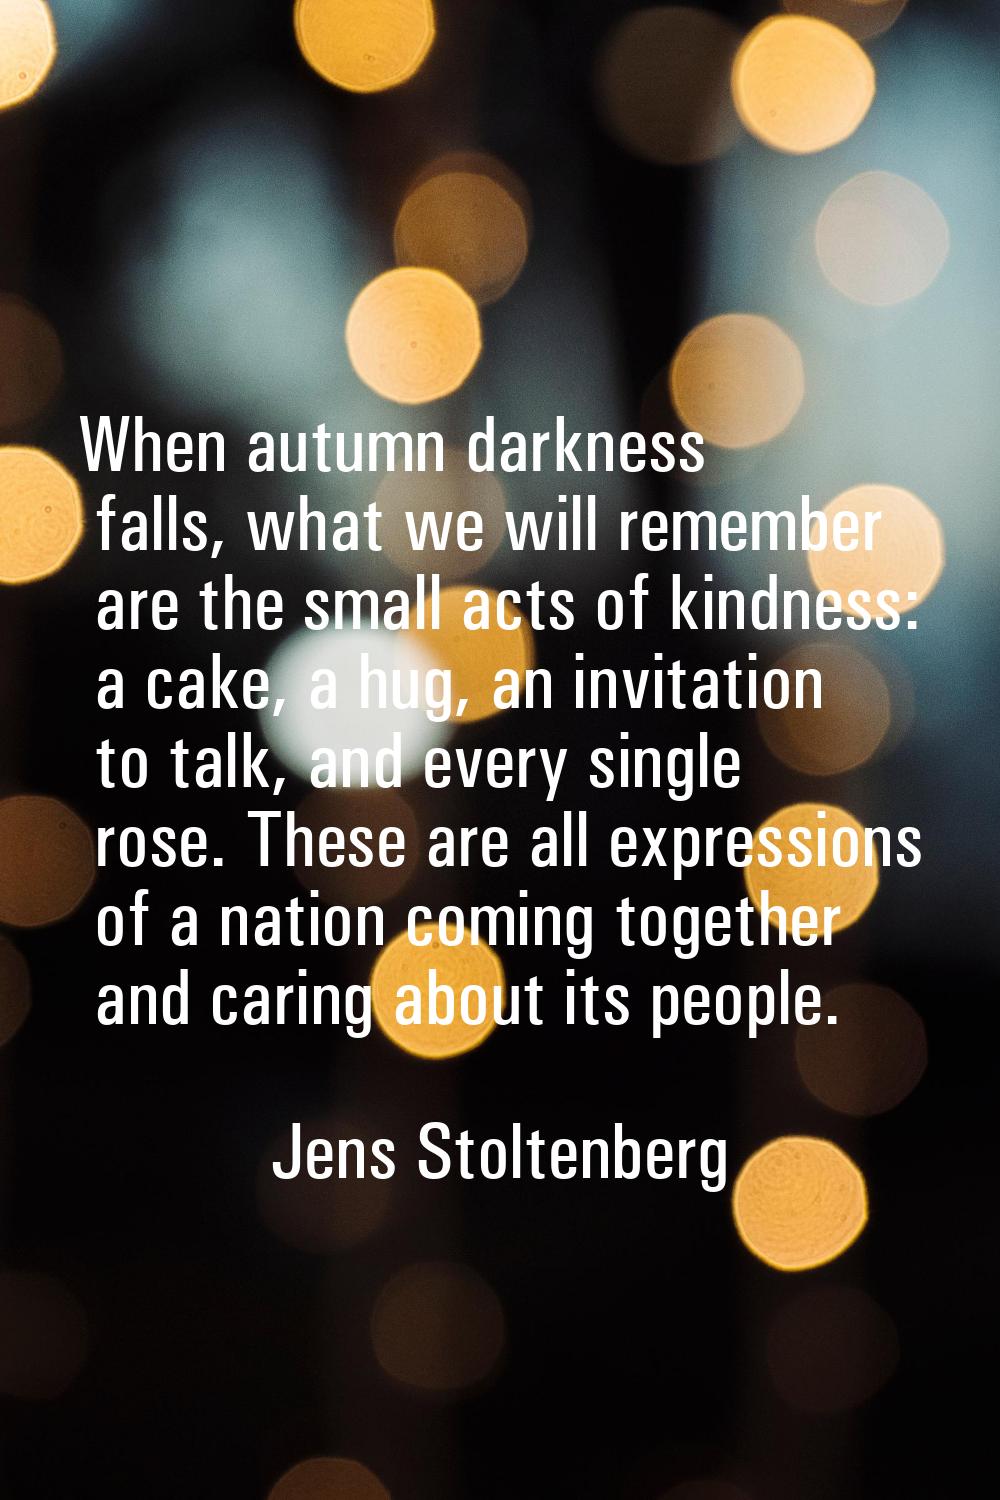 When autumn darkness falls, what we will remember are the small acts of kindness: a cake, a hug, an